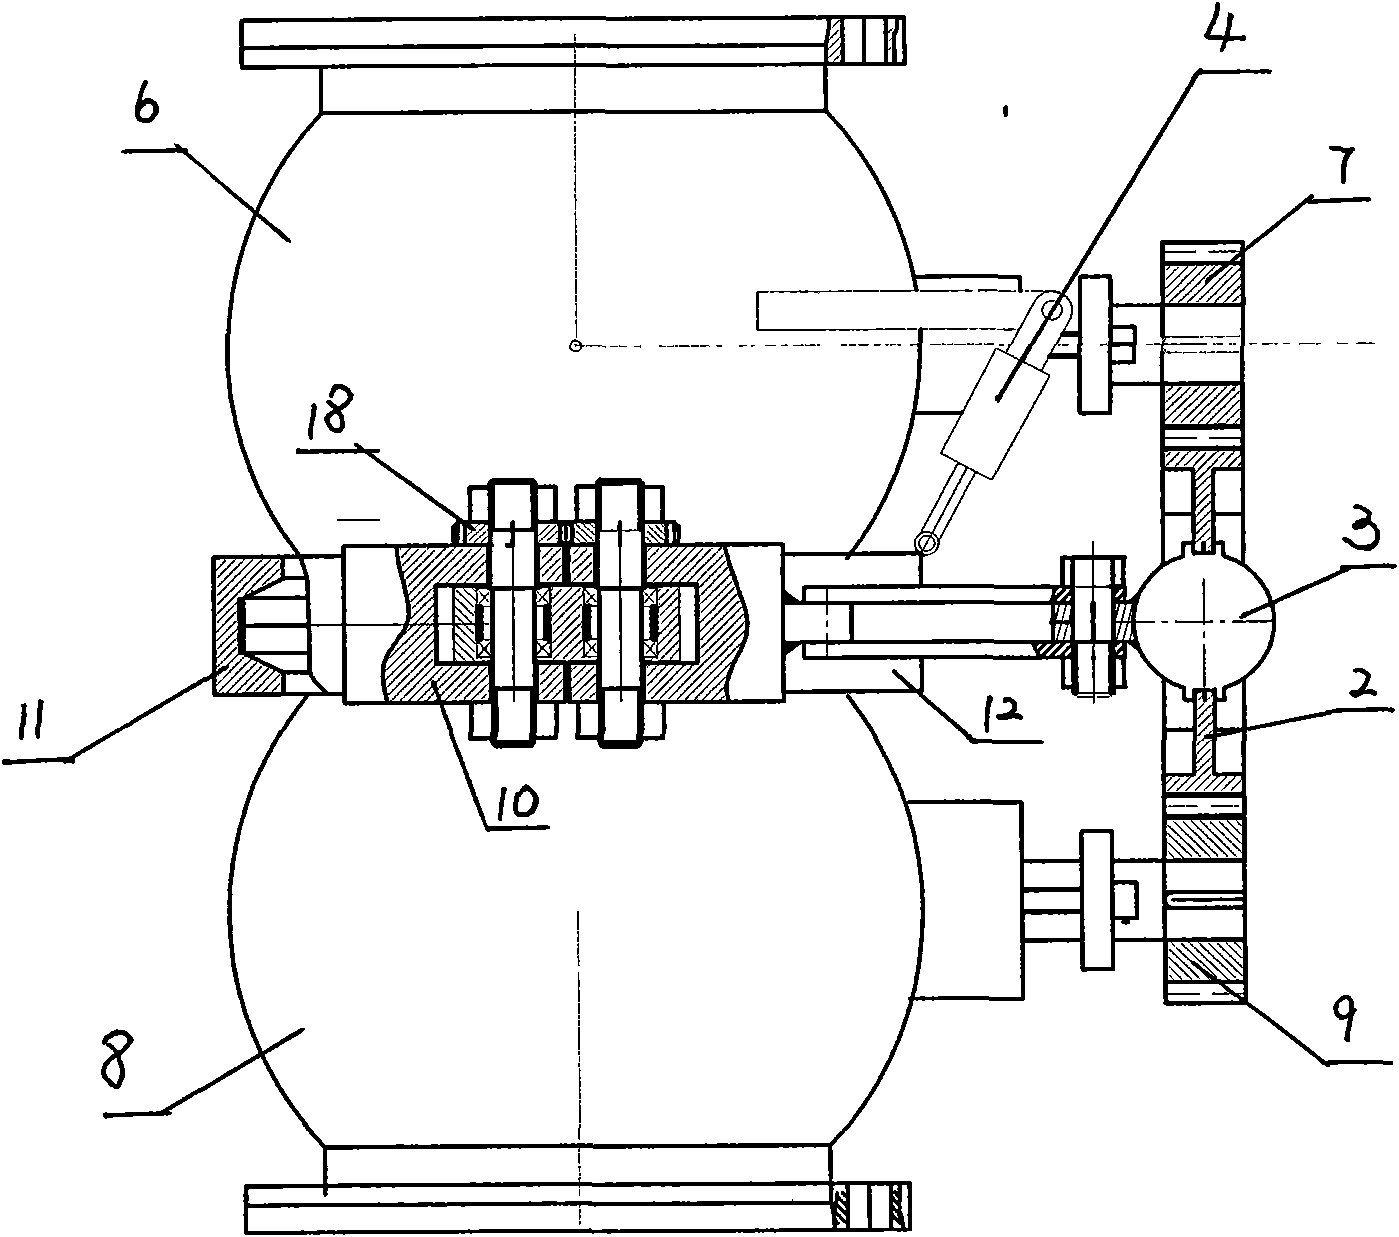 Emergency separating device for liquid transmission